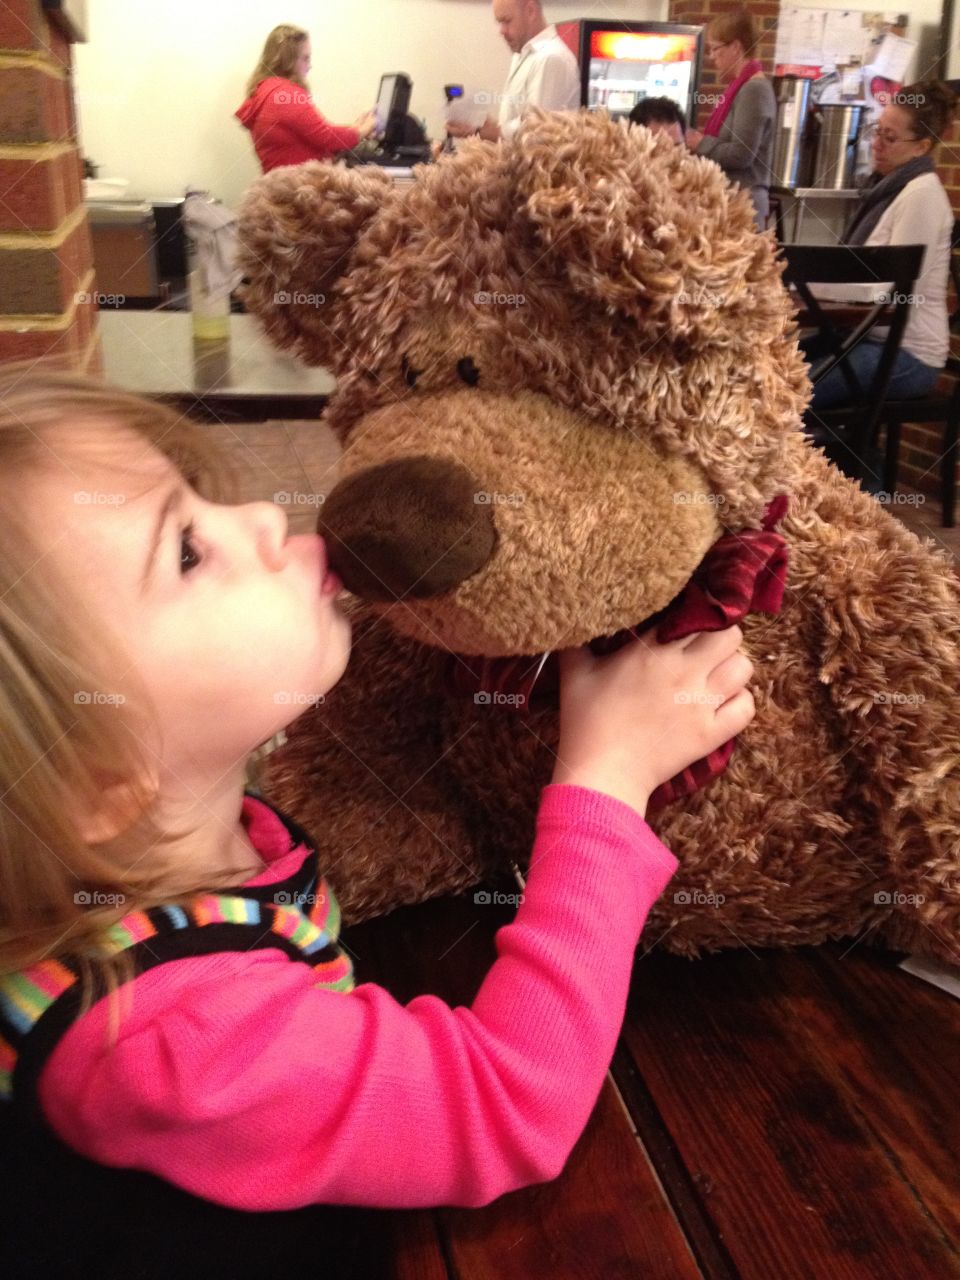 A girl and her bear